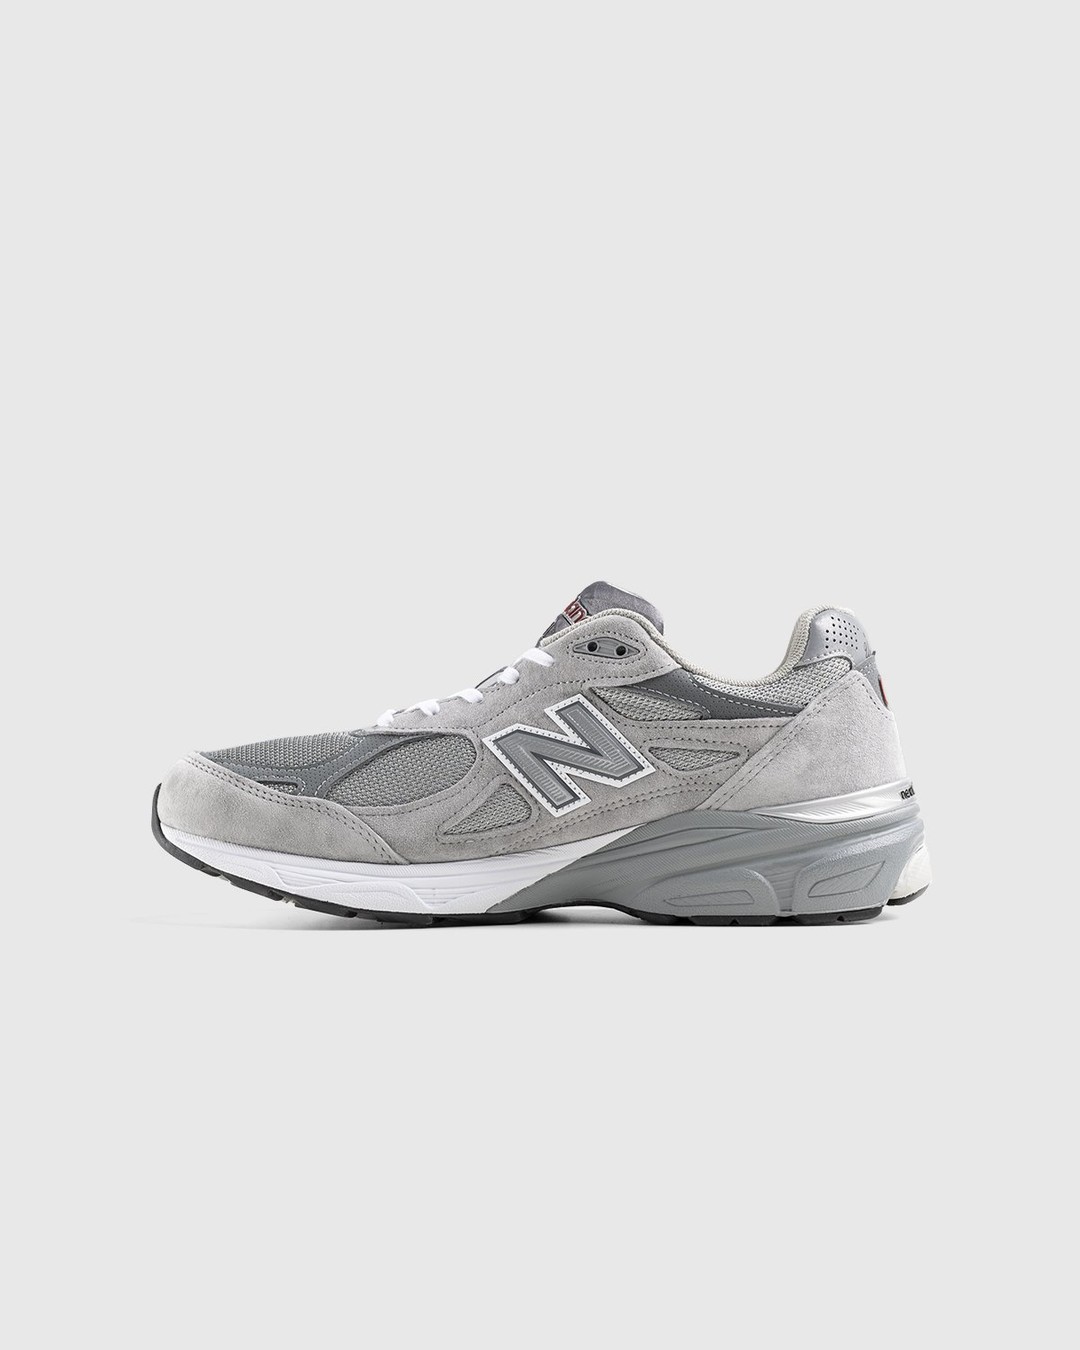 New Balance – M990GY3 Grey - Low Top Sneakers - Grey - Image 2